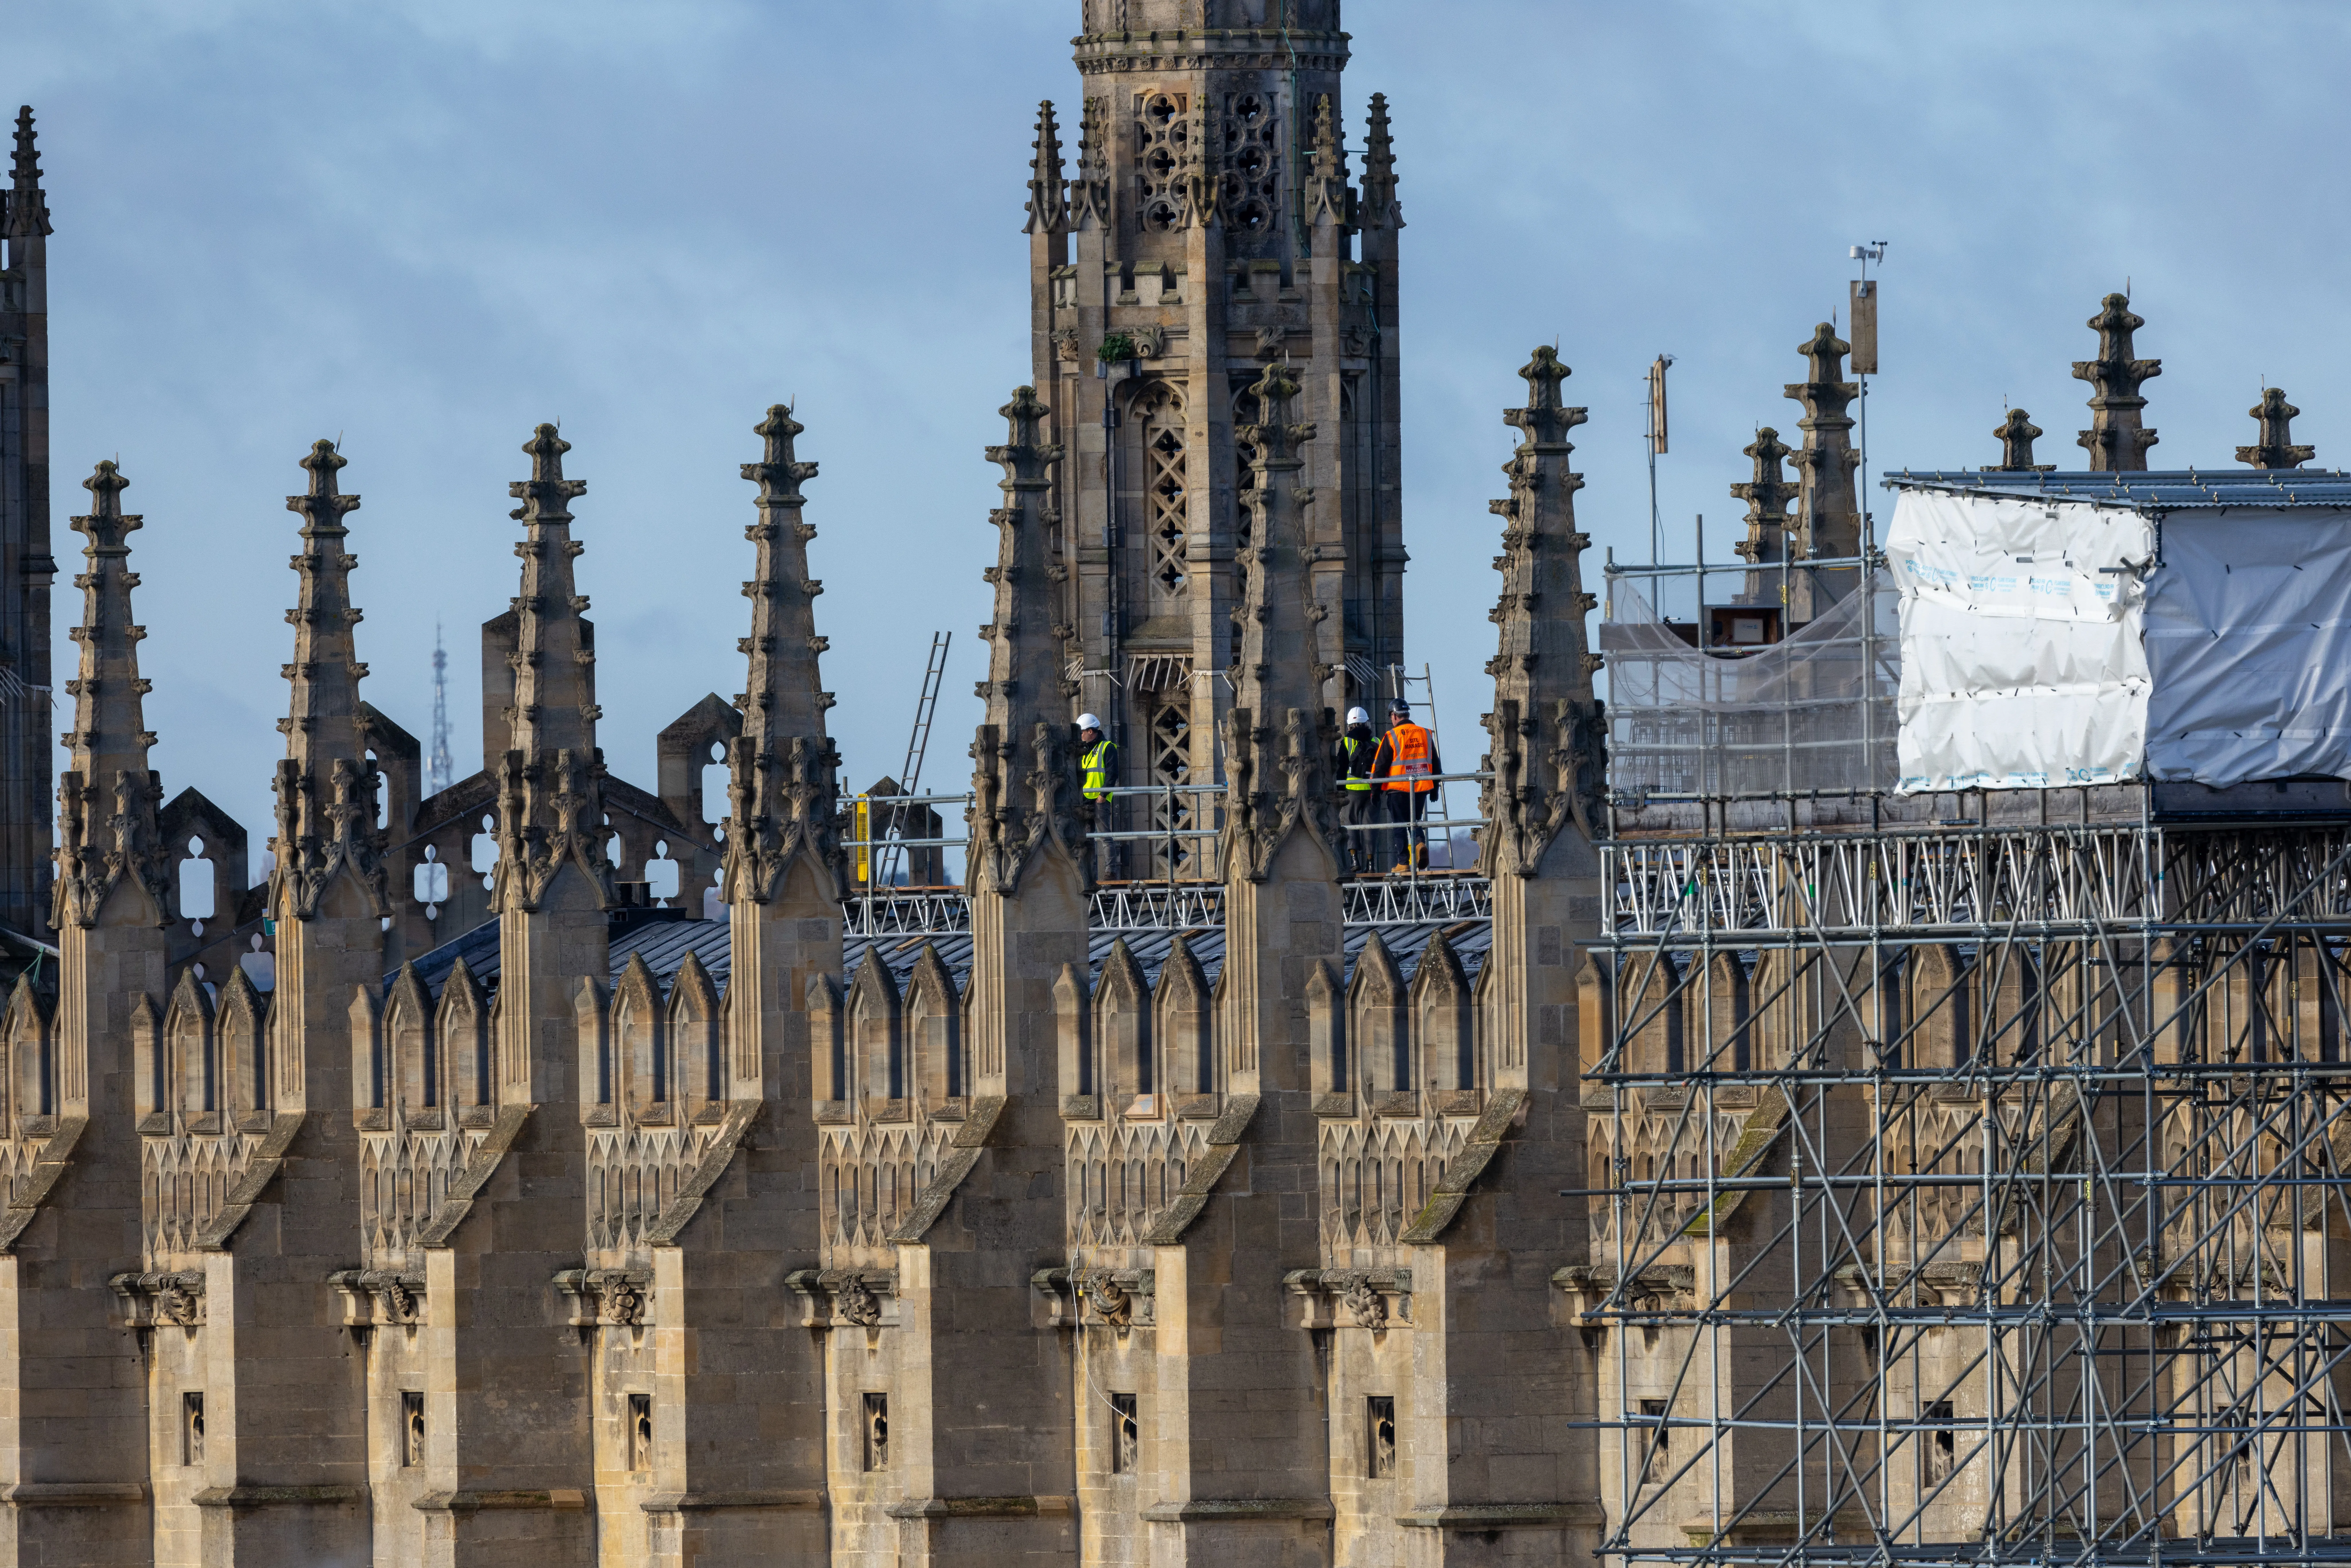 King’s College, Cambridge, has started placing solar panels on its iconic 15th century Chapel – despite opposition from local residents and organisations, including Historic England. PHOTO: BavMedia